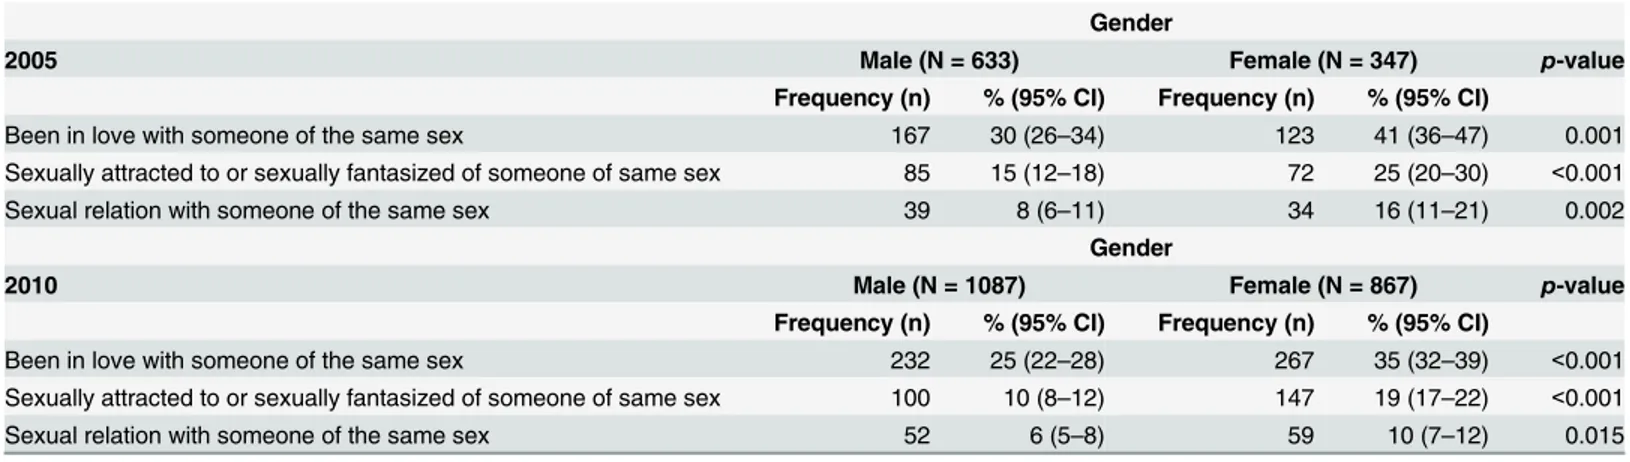 Table 2. Prevalence of same-sex sexuality by gender among university students in Uganda, 2005 (n = 980) and 2010 (n = 1954)